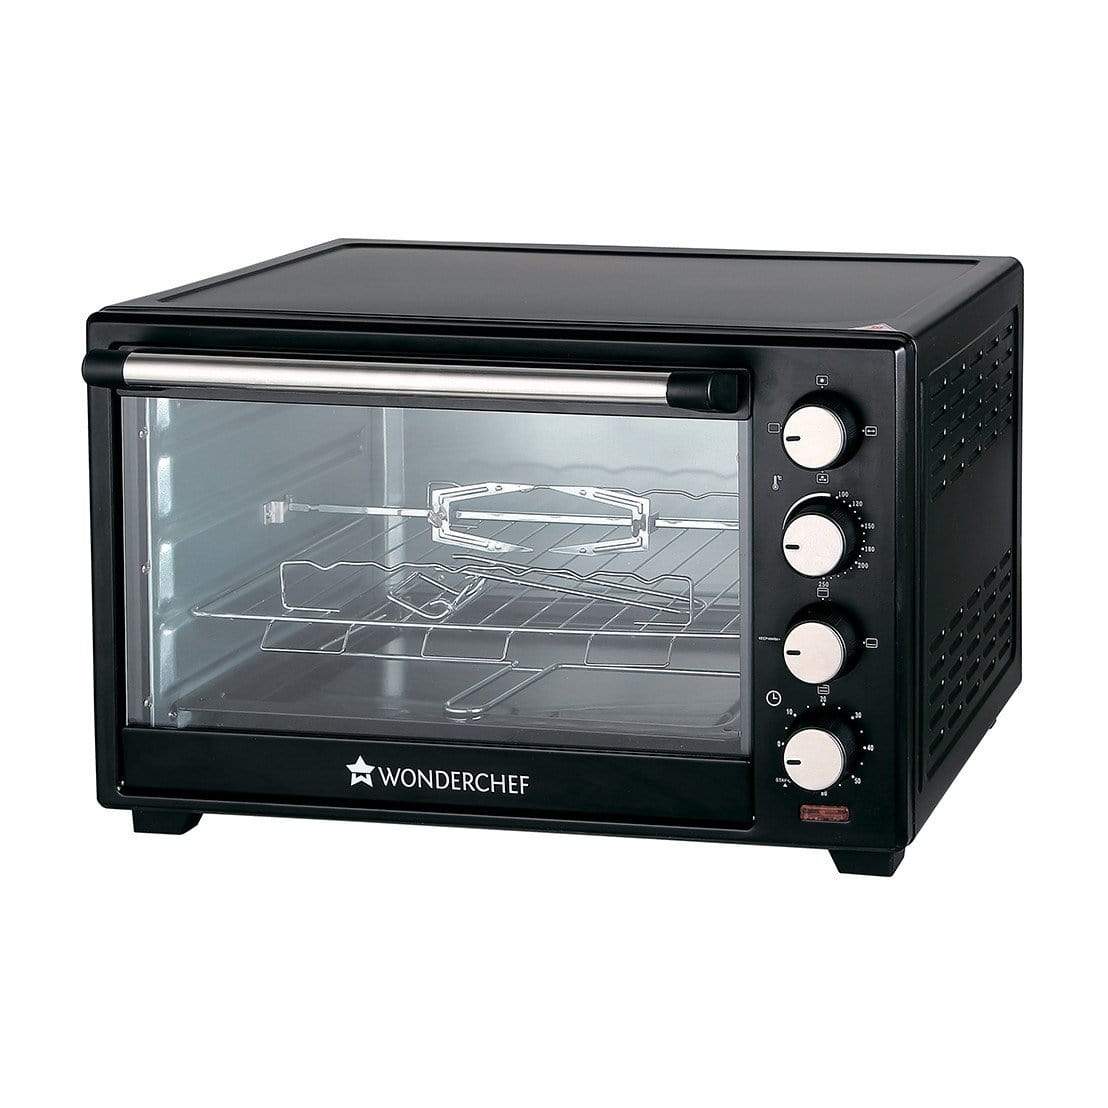 Wonderchef 63152220 28-Litre Oven Toaster Grill with Convection and Rotisserie (Black) - KITCHEN MART